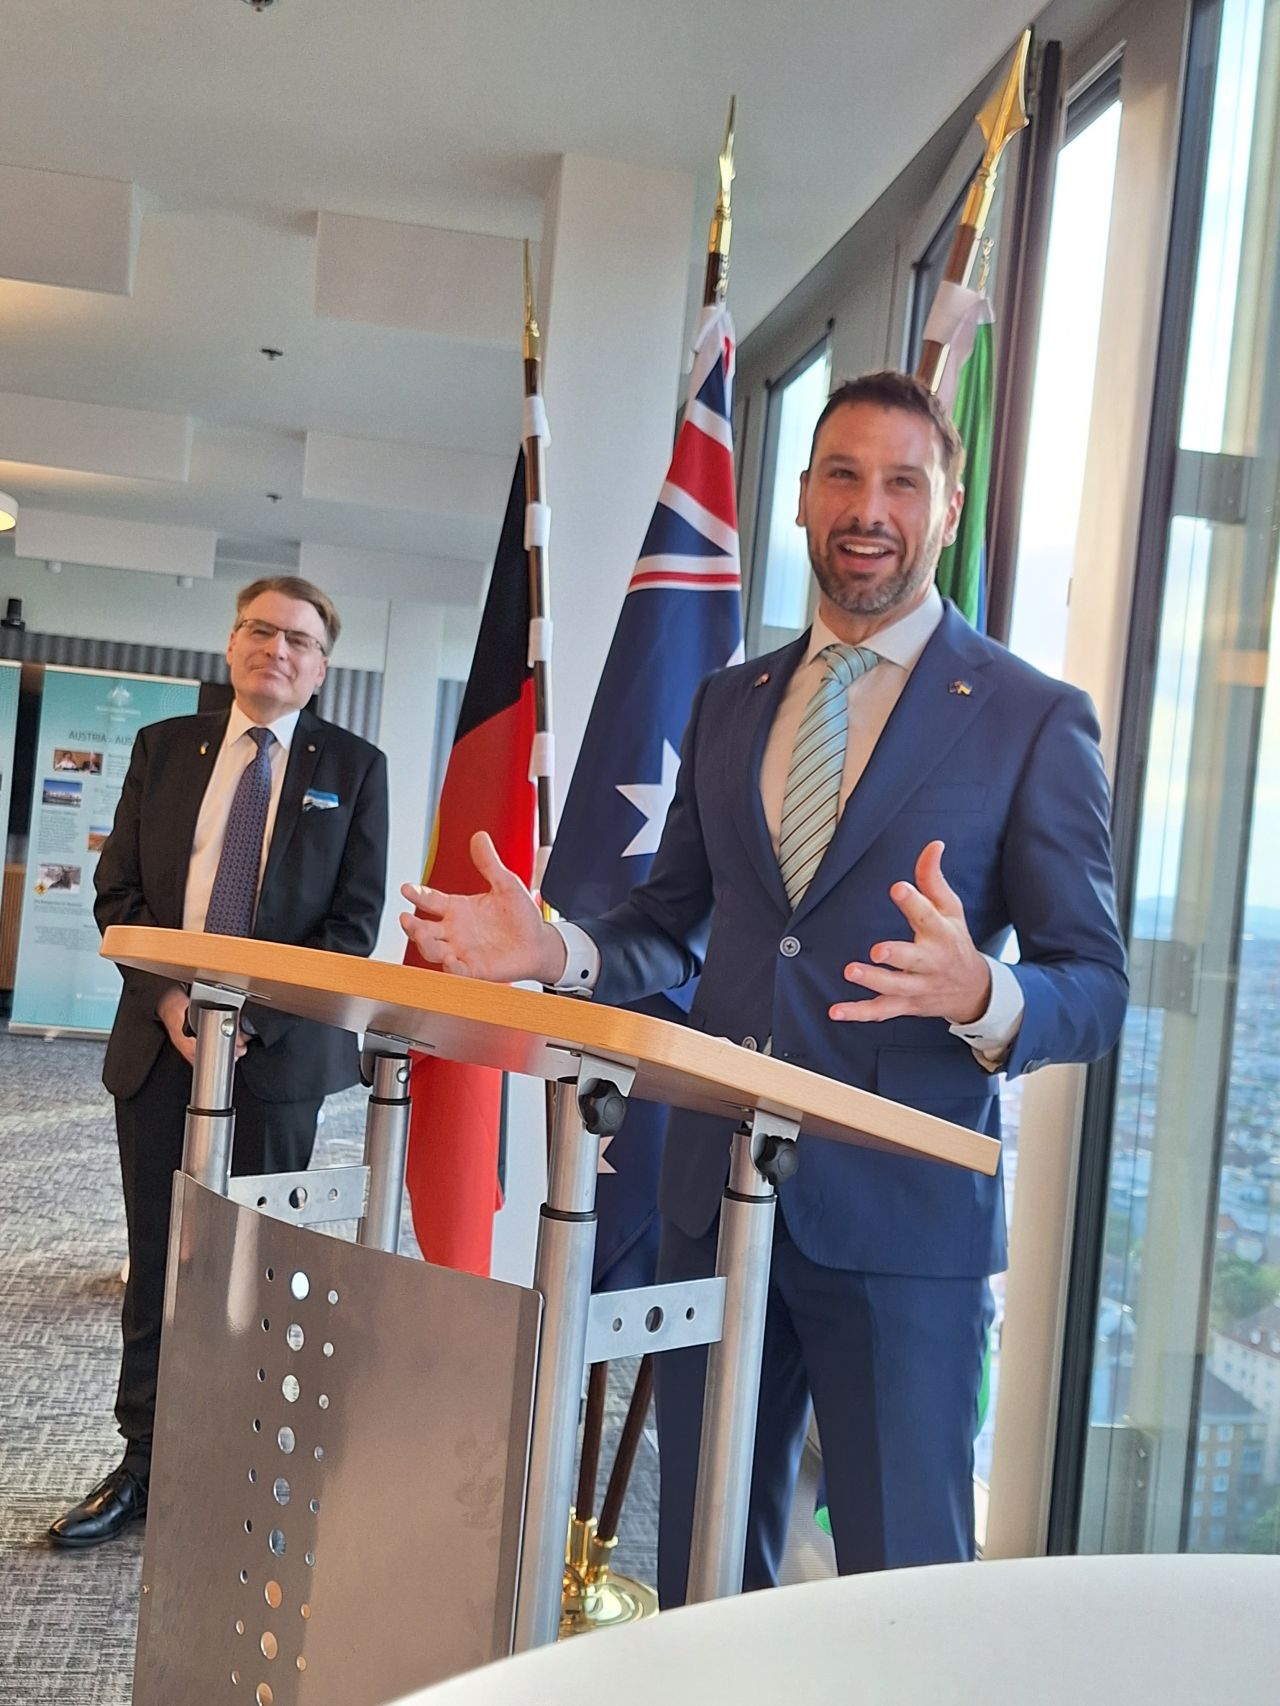 Chargé d’Affaires of the Australian Embassy in Vienna, Mr Emil Stojanovski, addressing Welcome Reception guests.